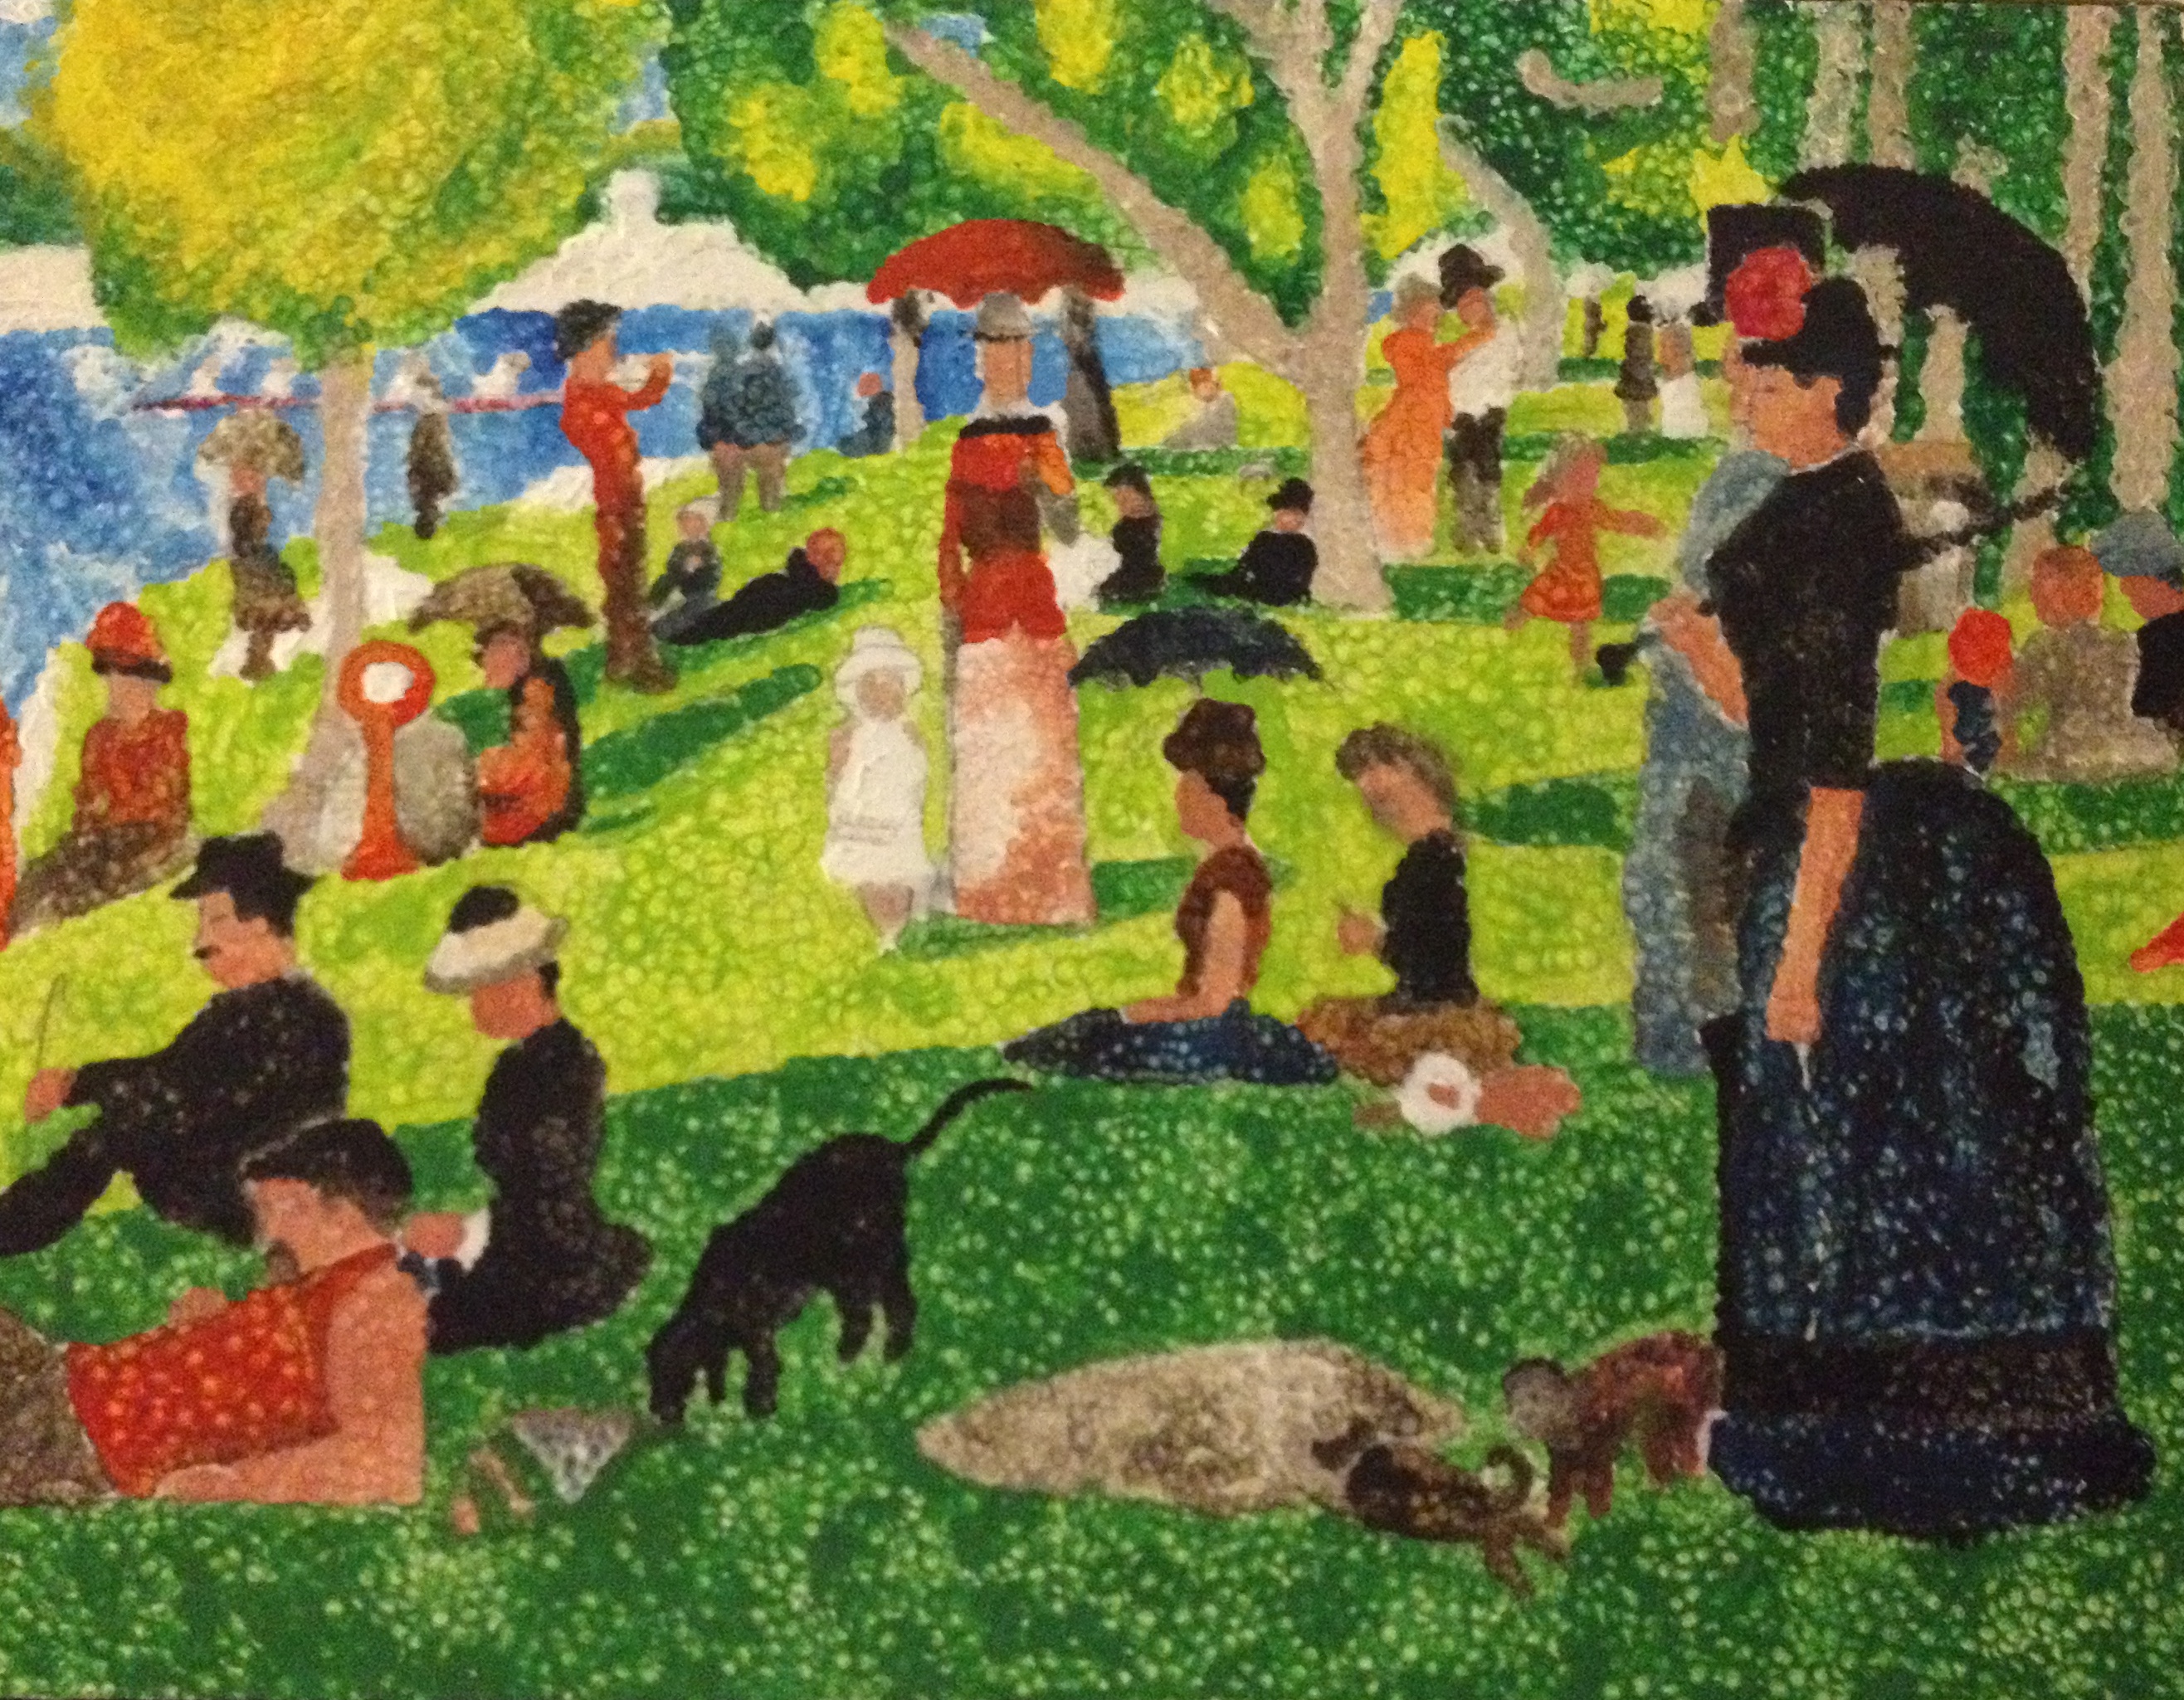 Rendition of 'A Sunday Afternoon on the Island of La Grande Jatte' by Geroges Seurat (2013, acrylic on wood with cotton tips)